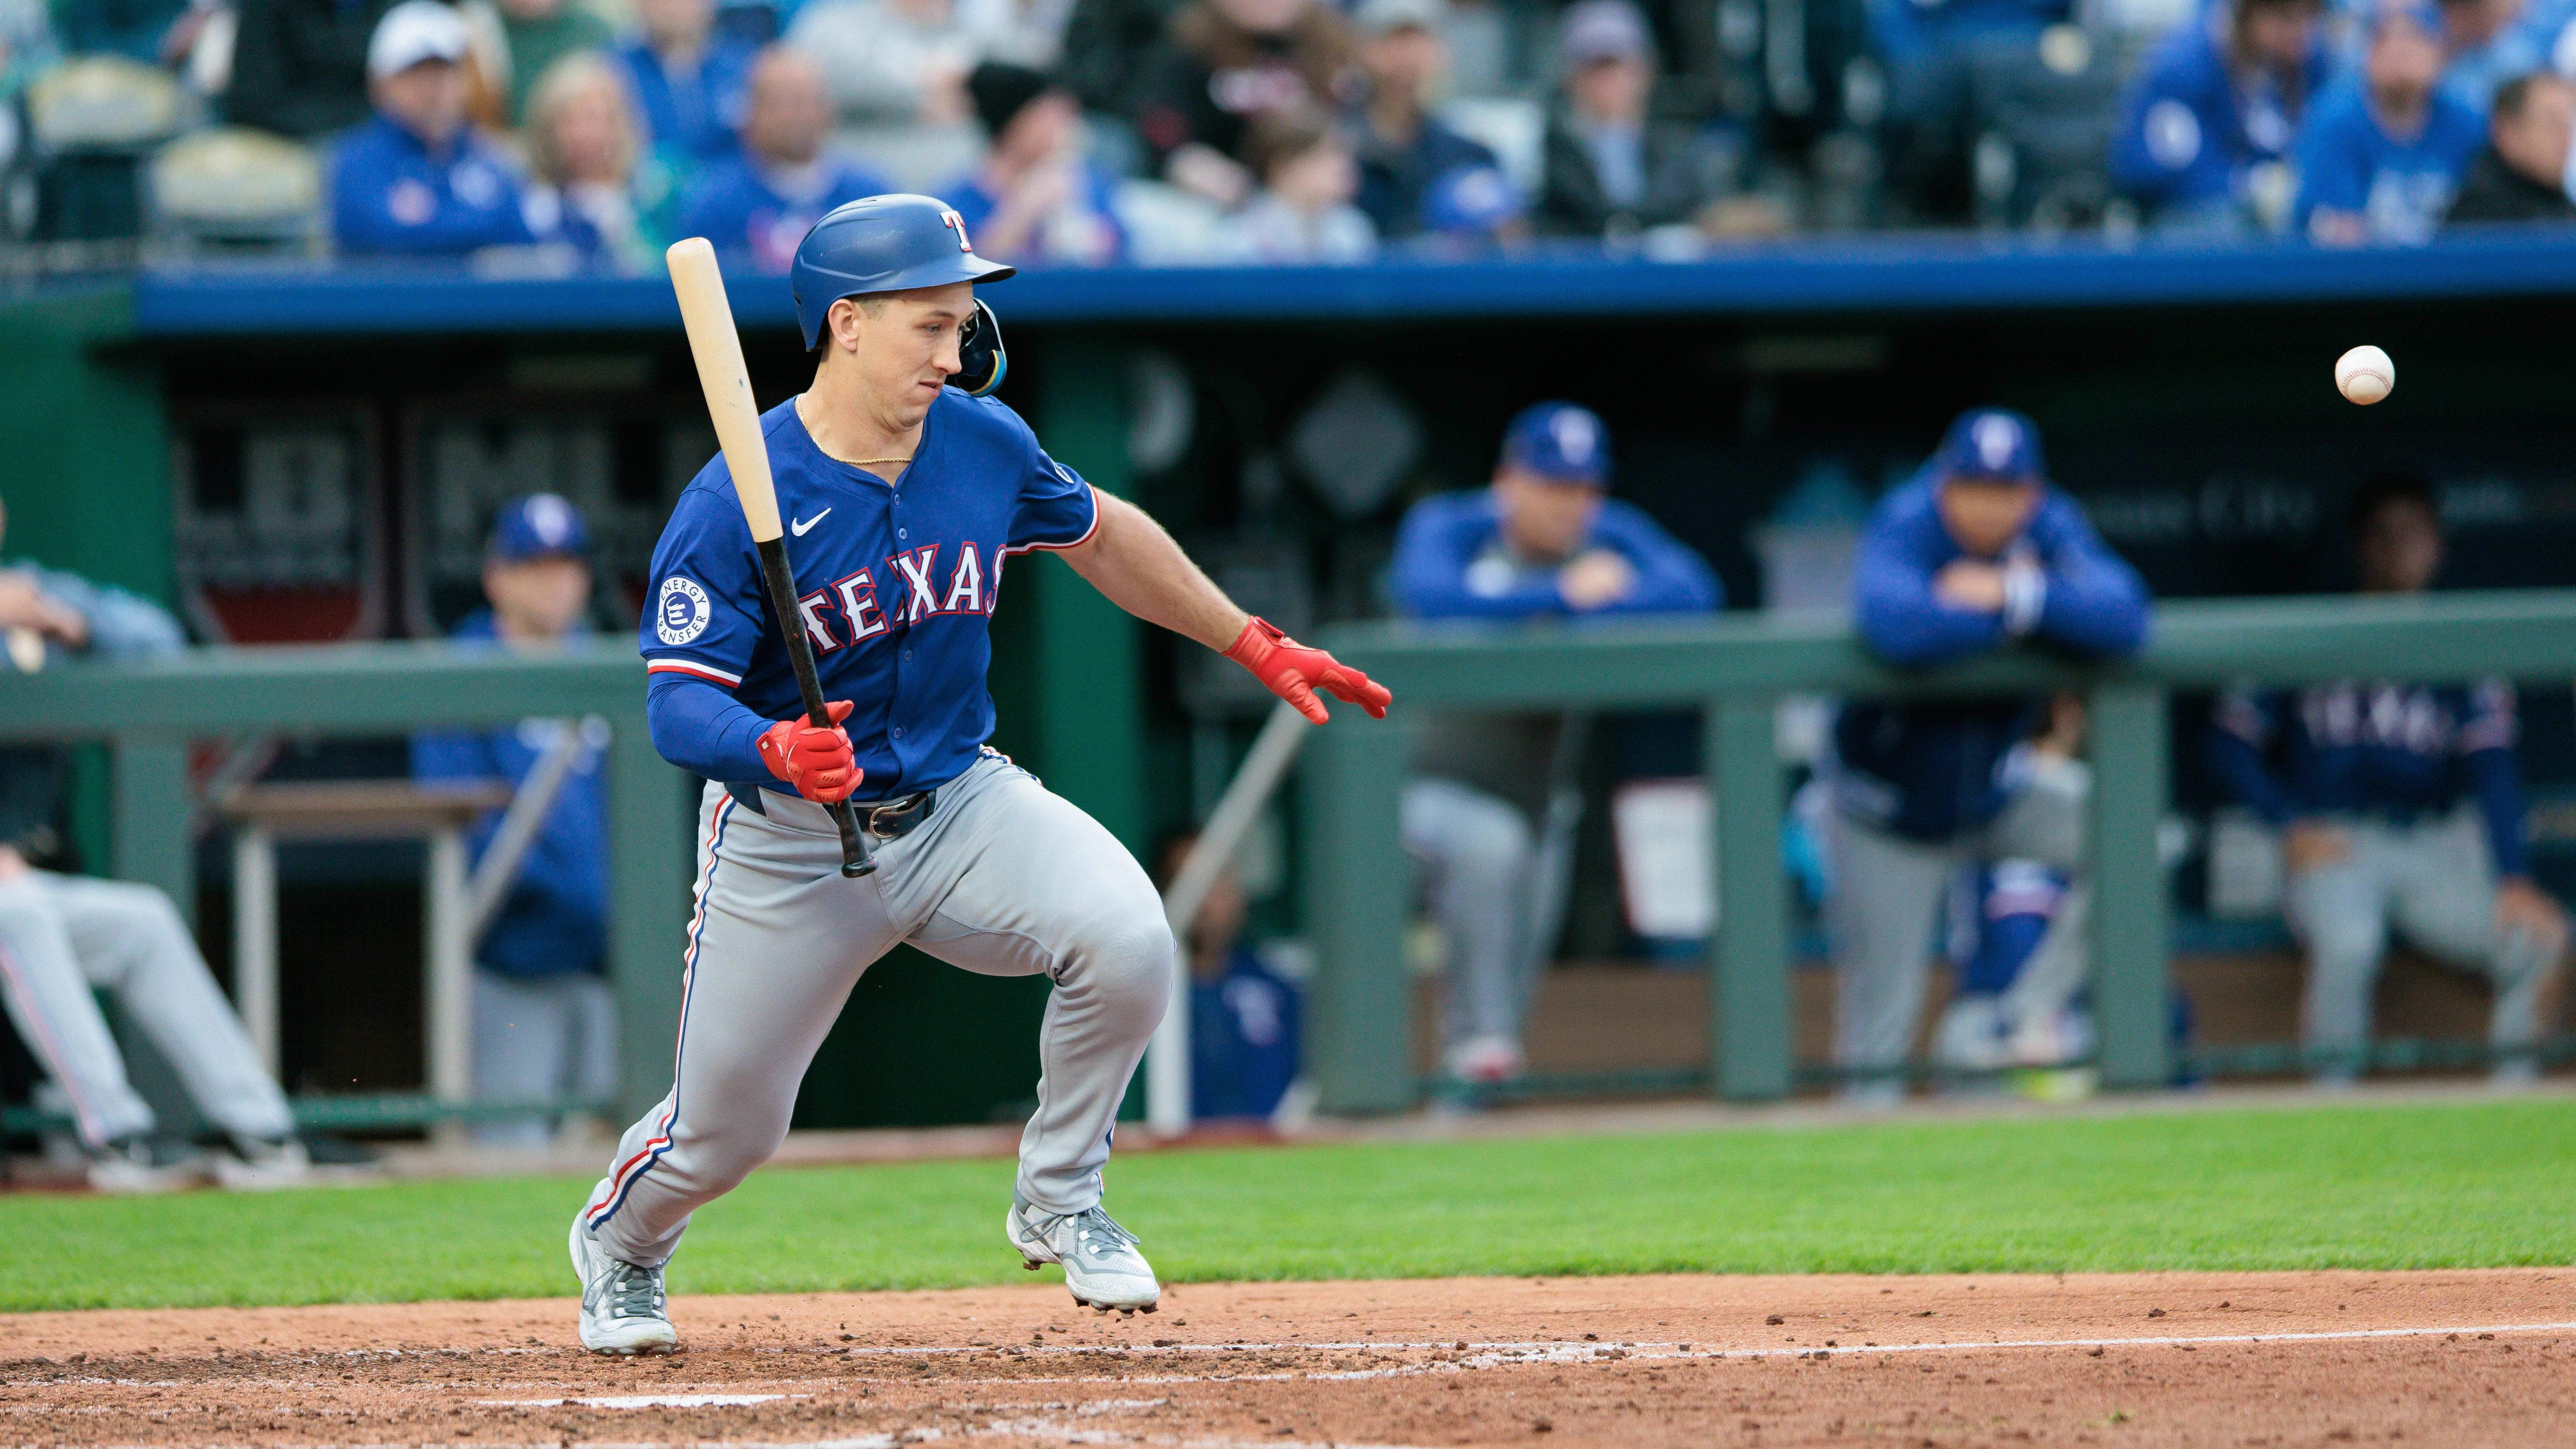 The Texas Rangers' offense explodes, but rookie Slugger exits early with an injury while out against the Royals